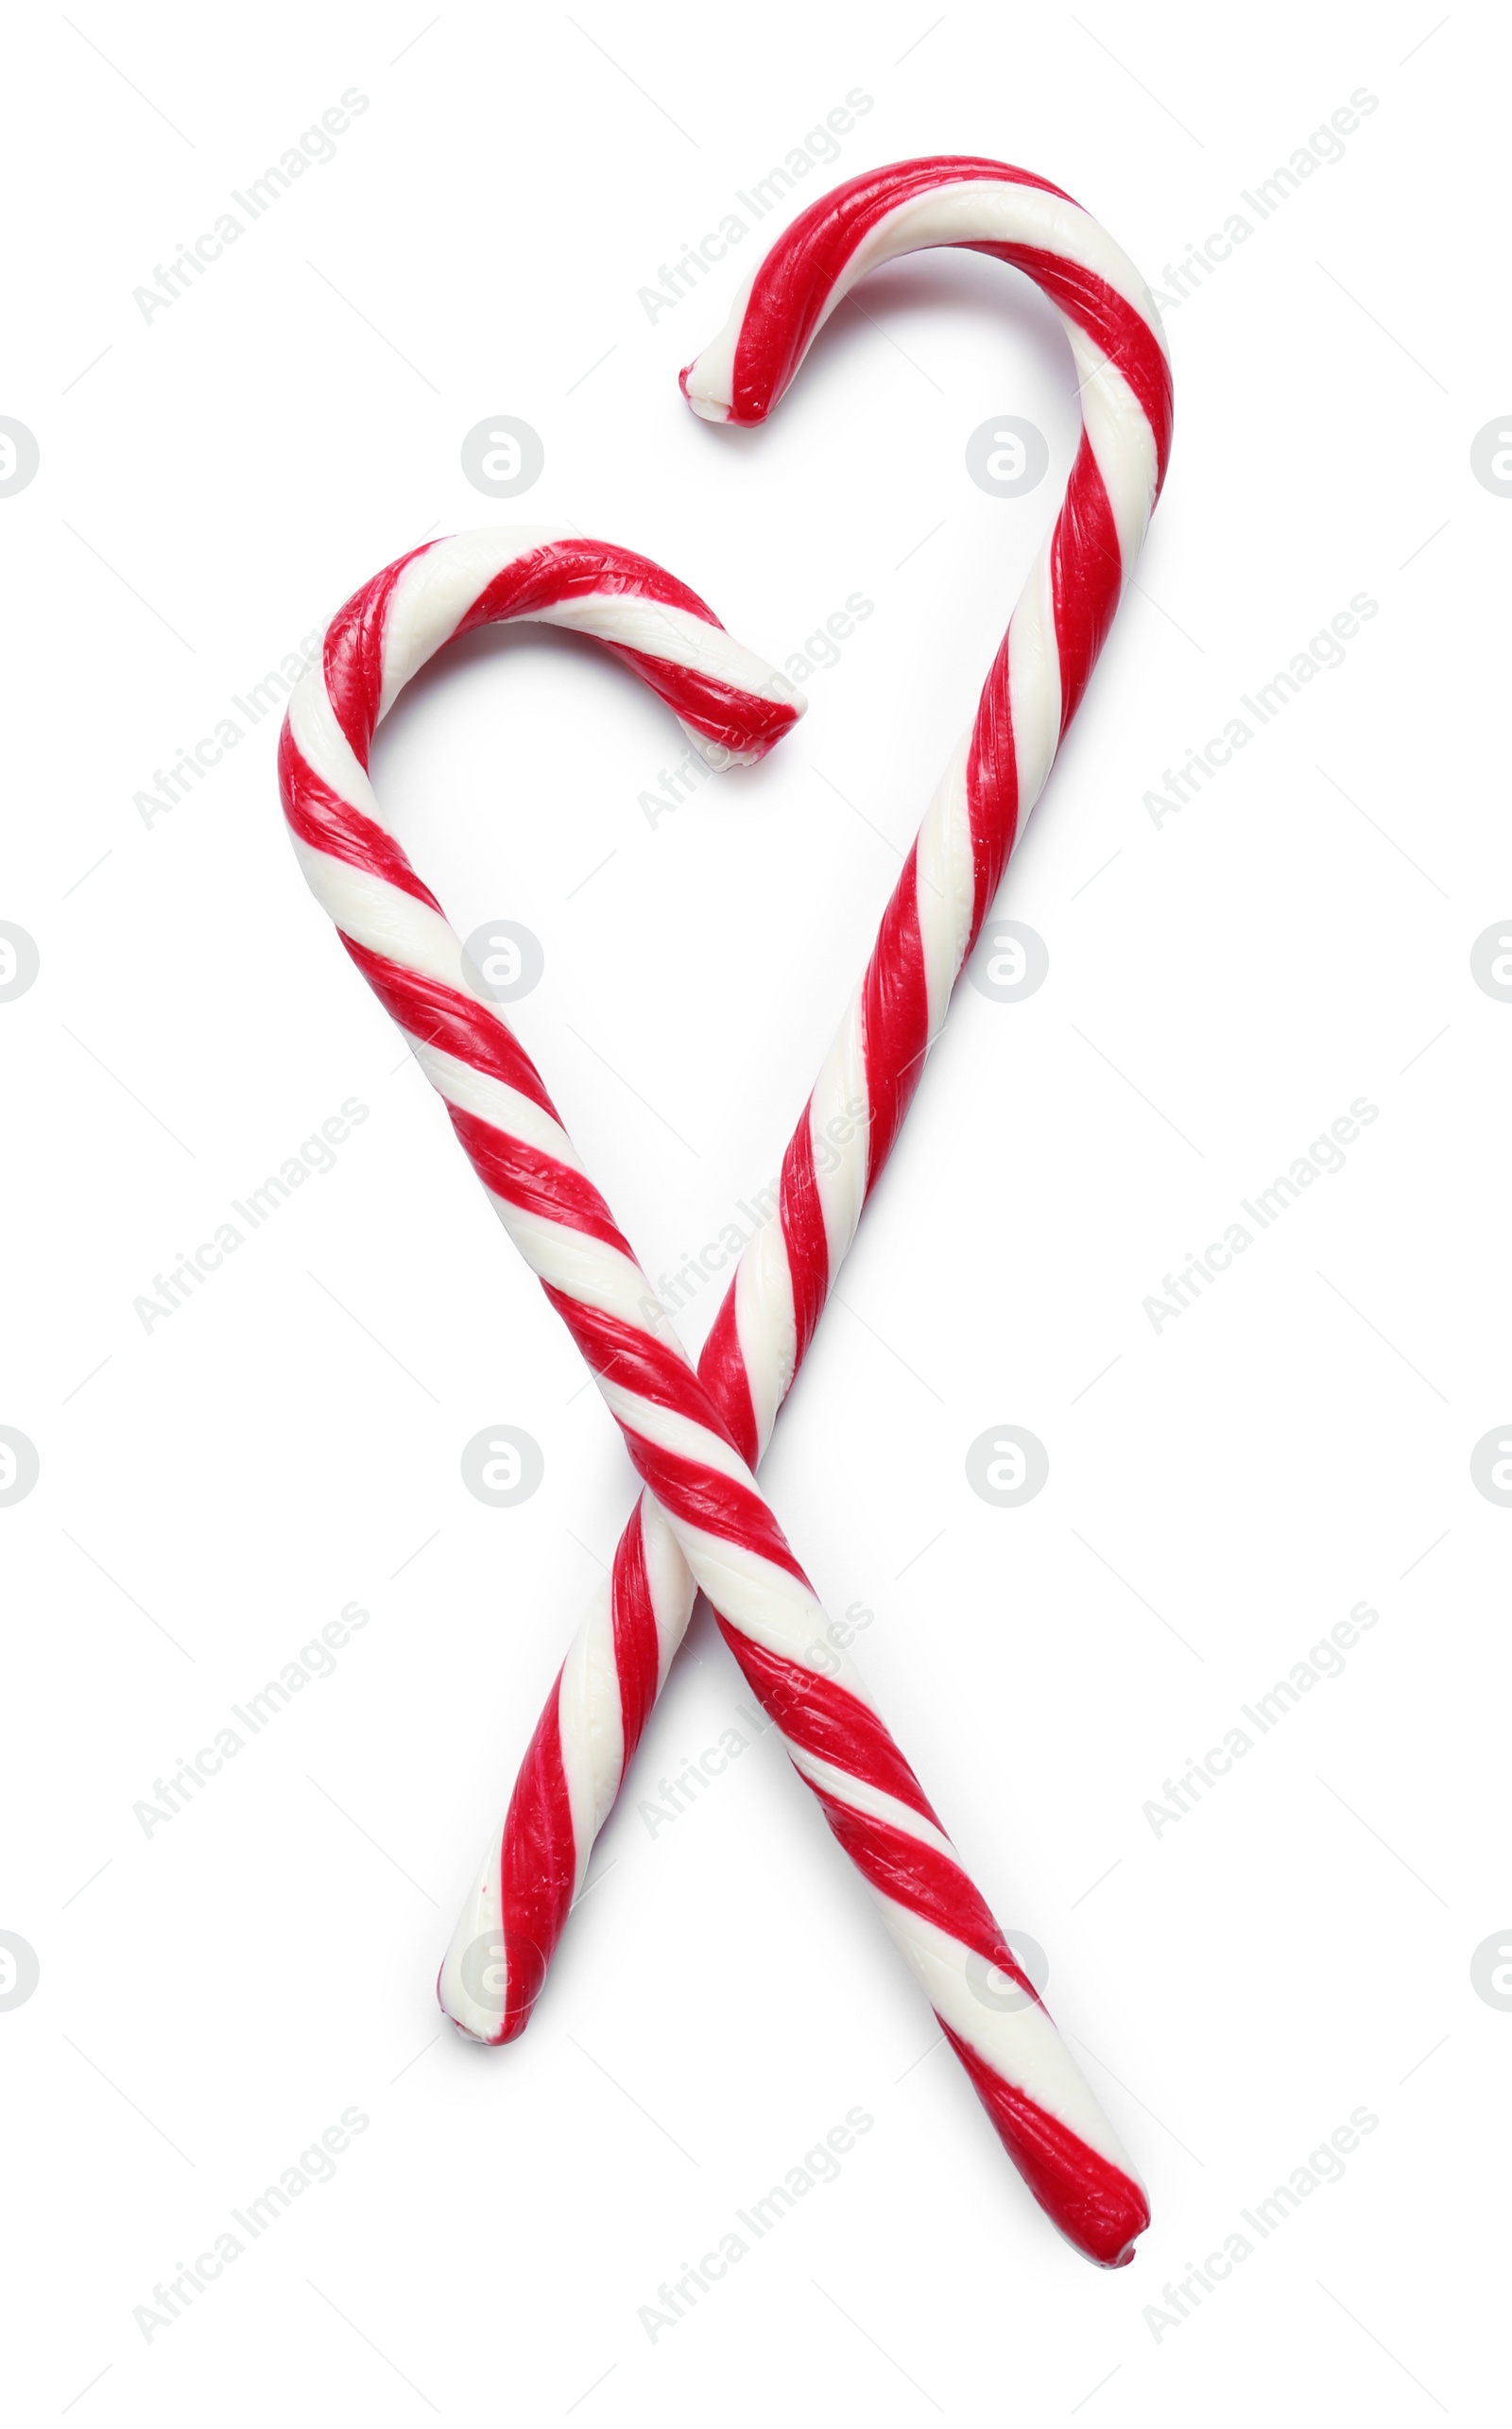 Image of Sweet candy canes on white background, top view. Christmas treat 